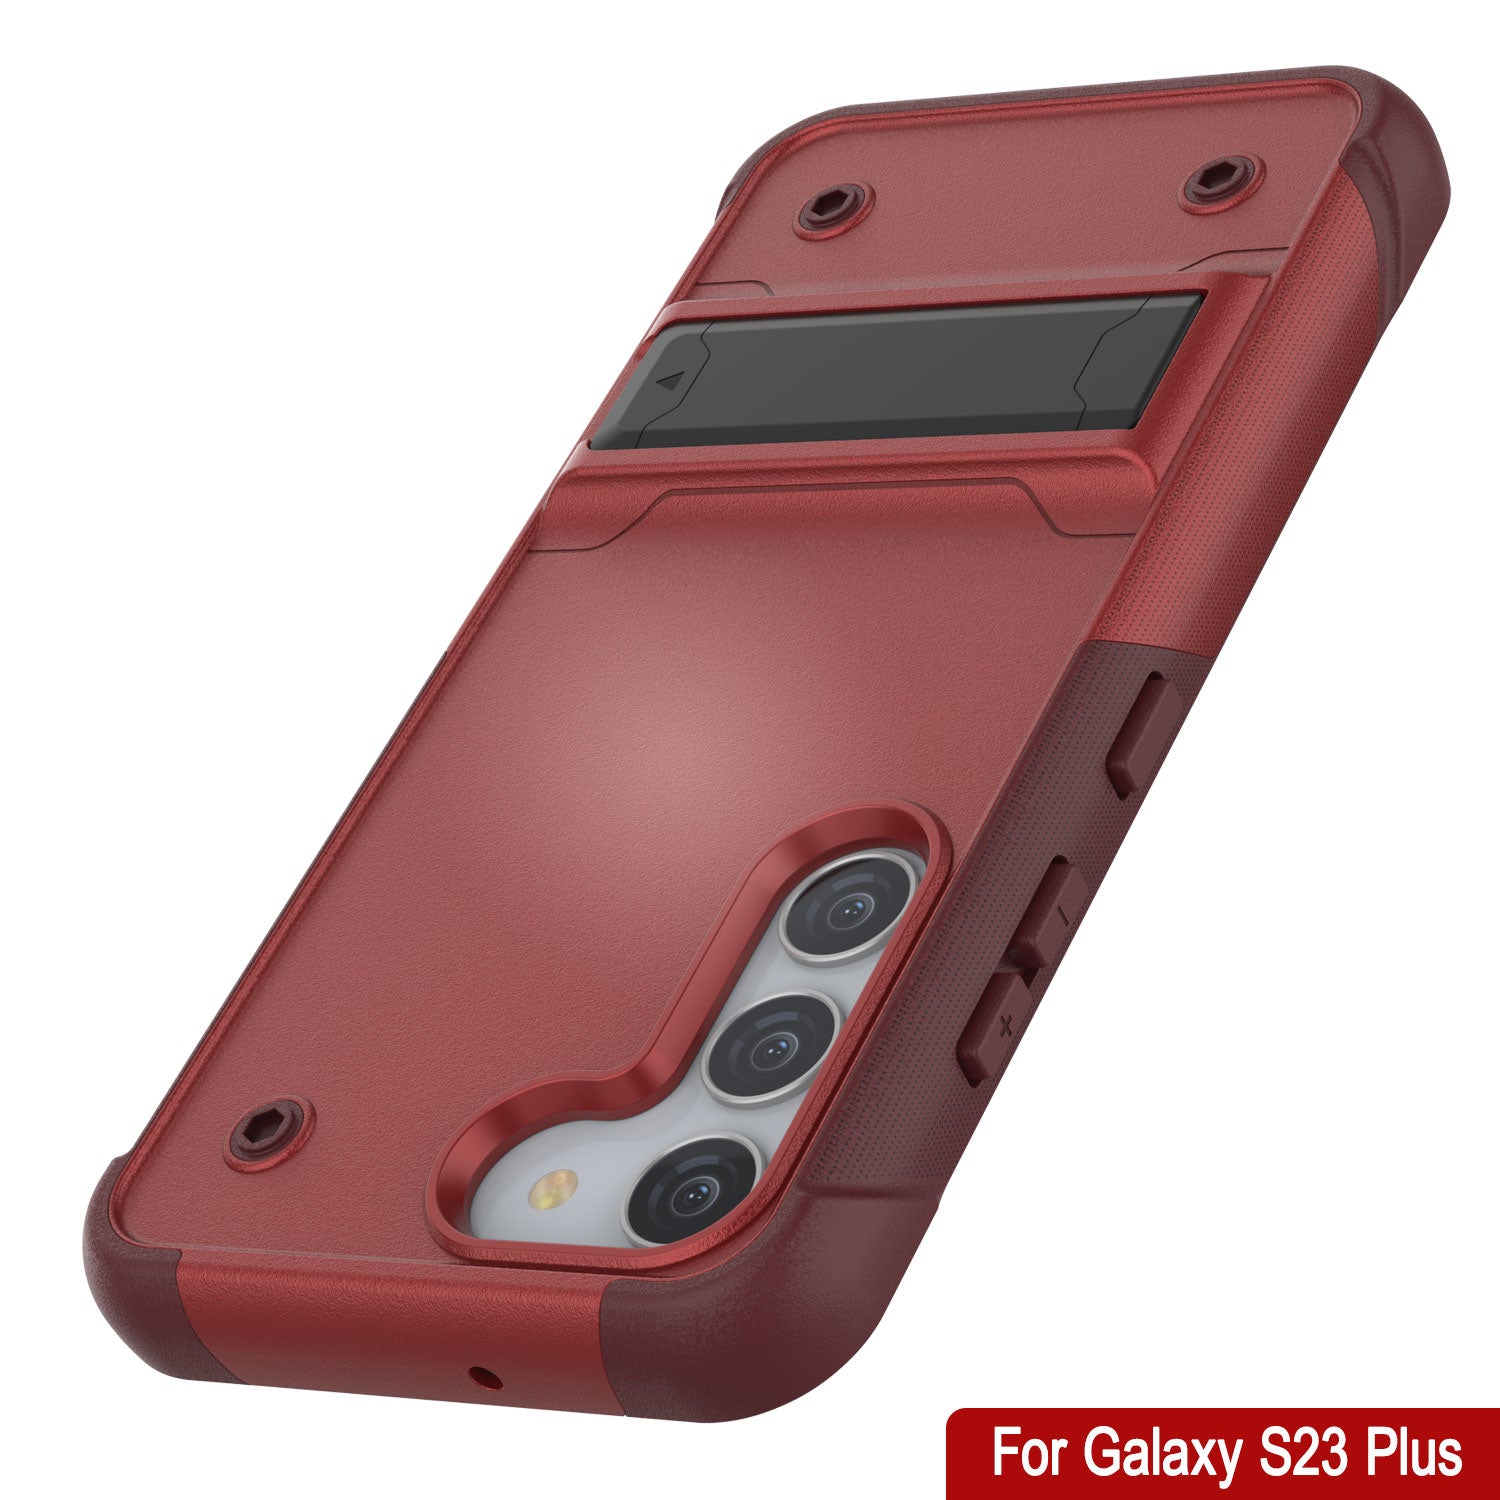 Punkcase Galaxy S24+ Plus Case [Reliance Series] Protective Hybrid Military Grade Cover W/Built-in Kickstand [Red-Rose]